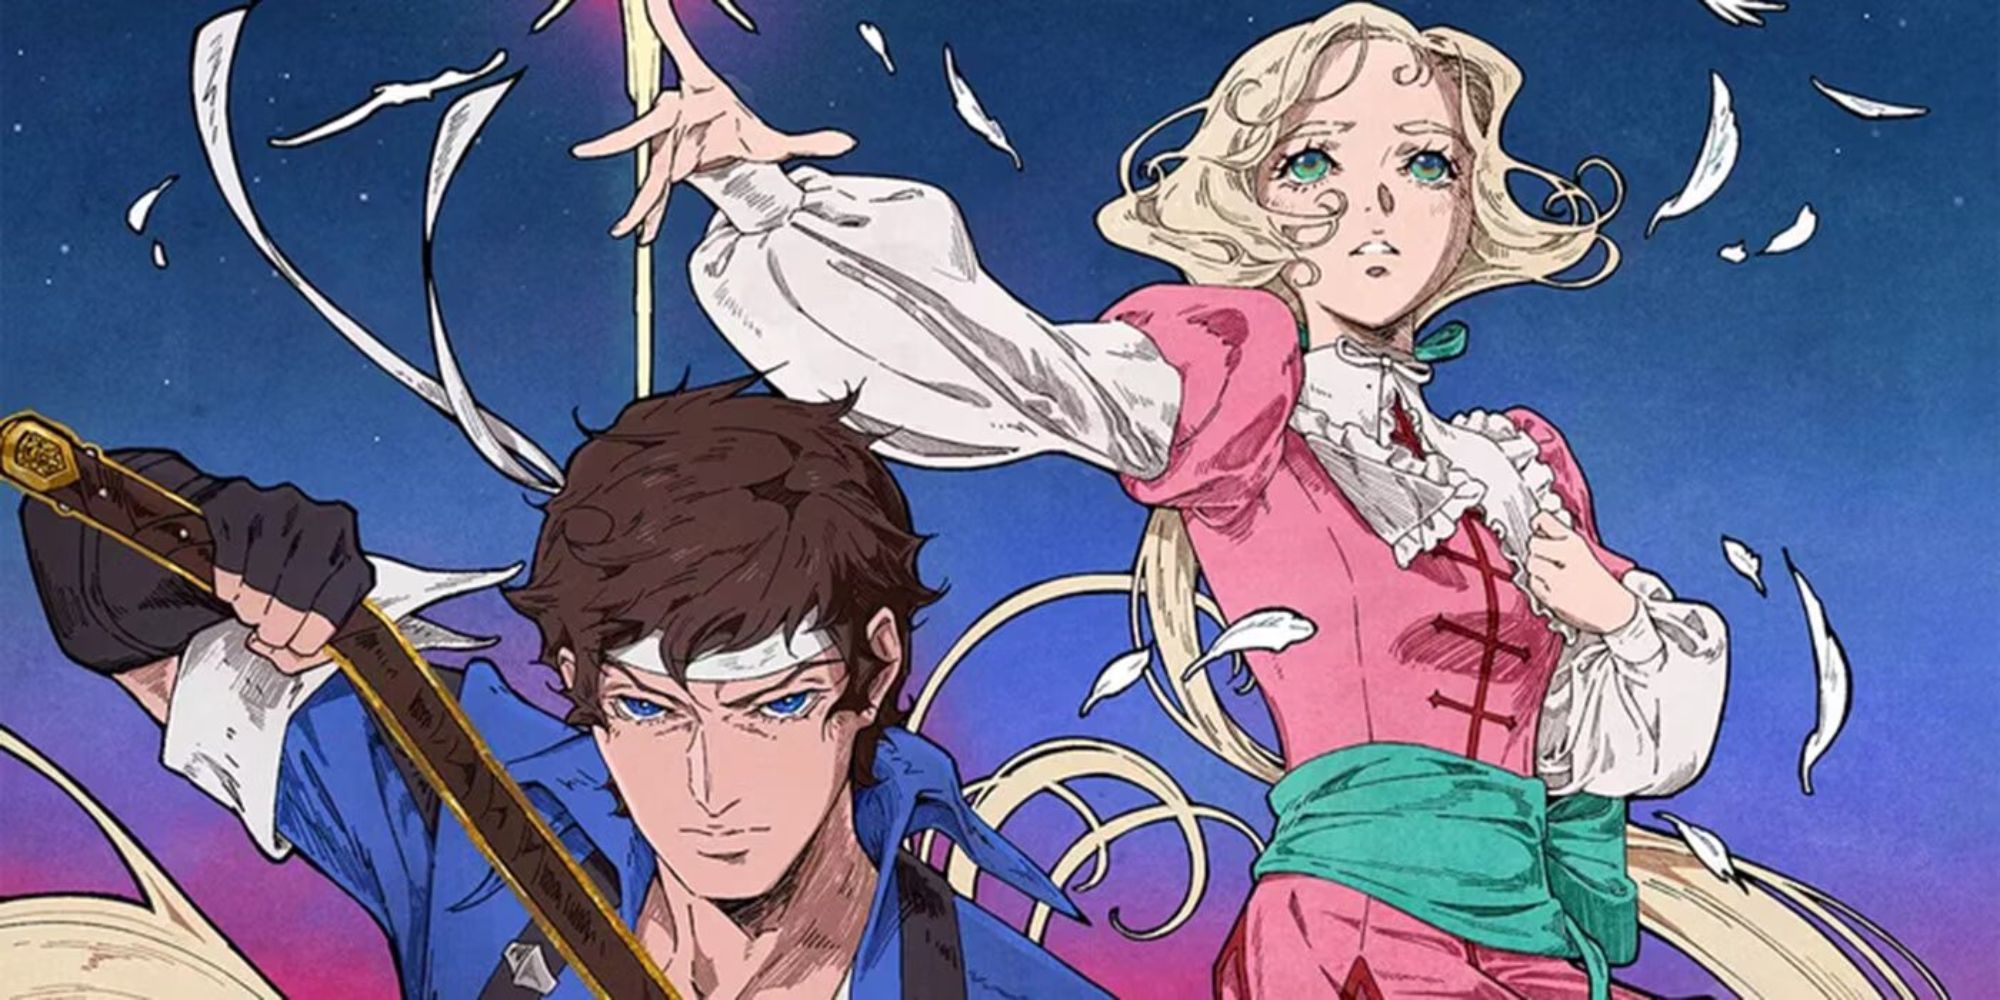 Still of Richter Belmont and Maria drawing weapons against a blue background in Castlevania Nocturne